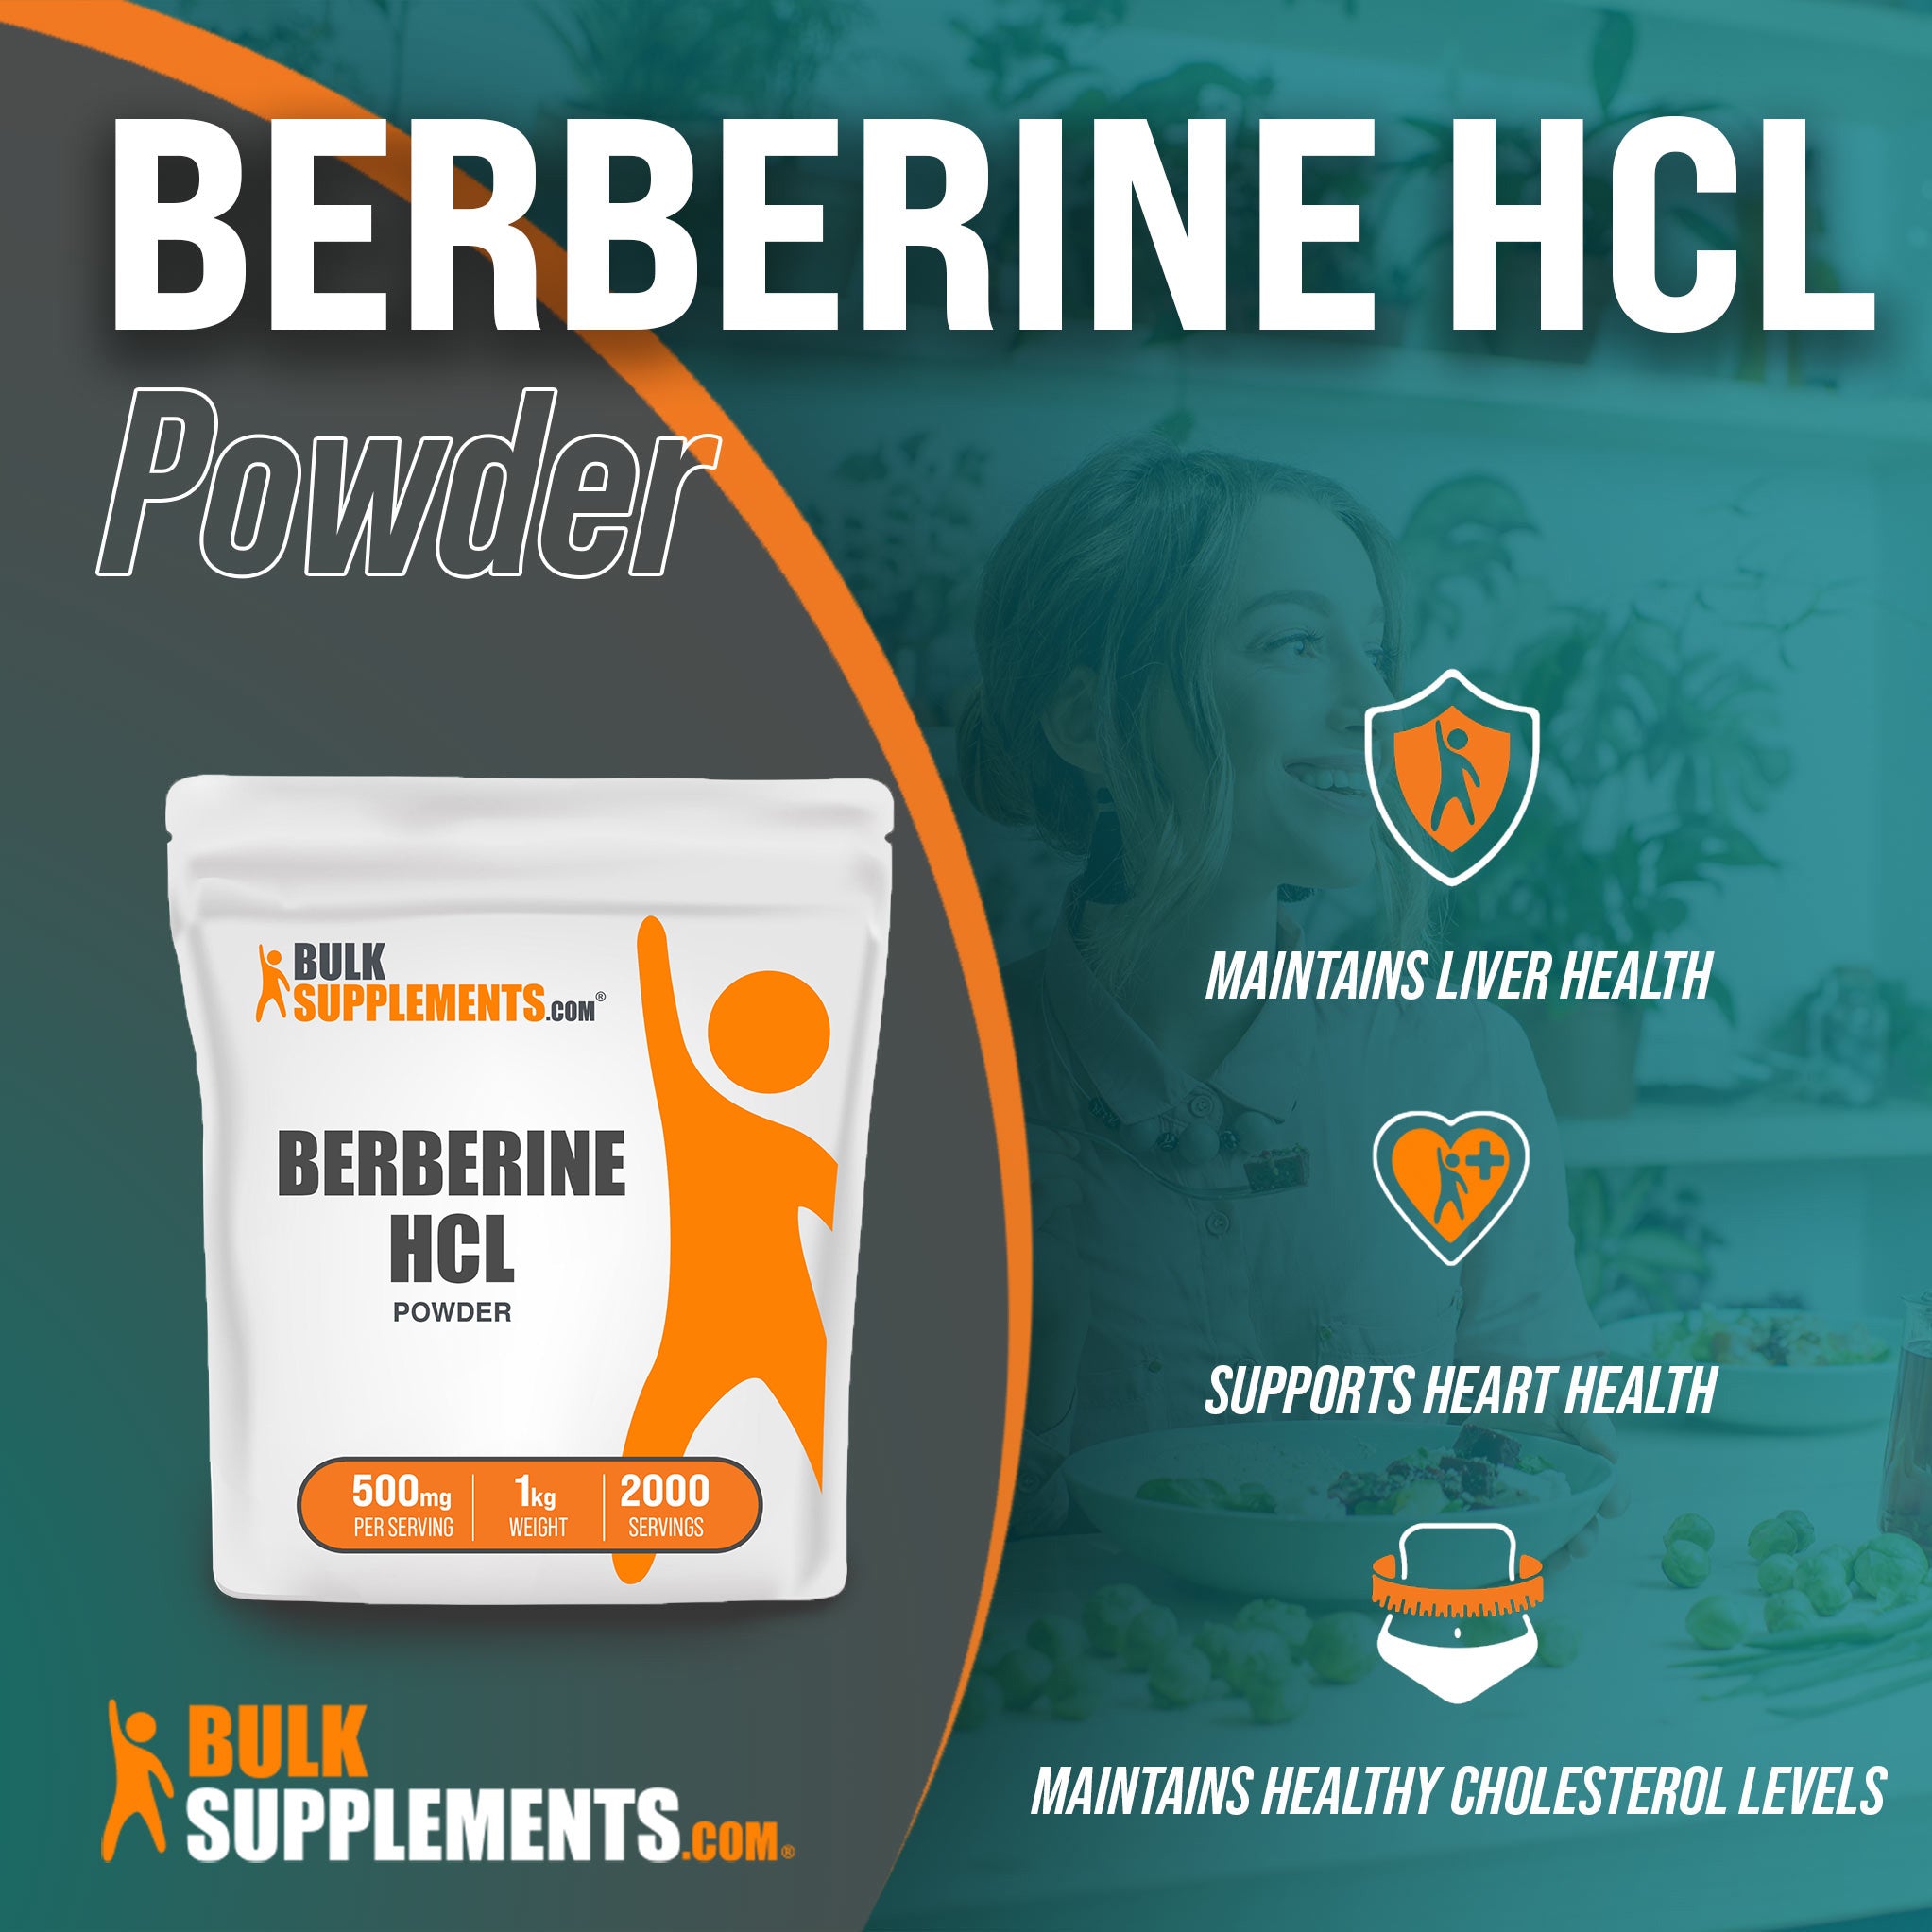 Berberine HCl from Bulk Supplements for better cholesterol levels and heart health